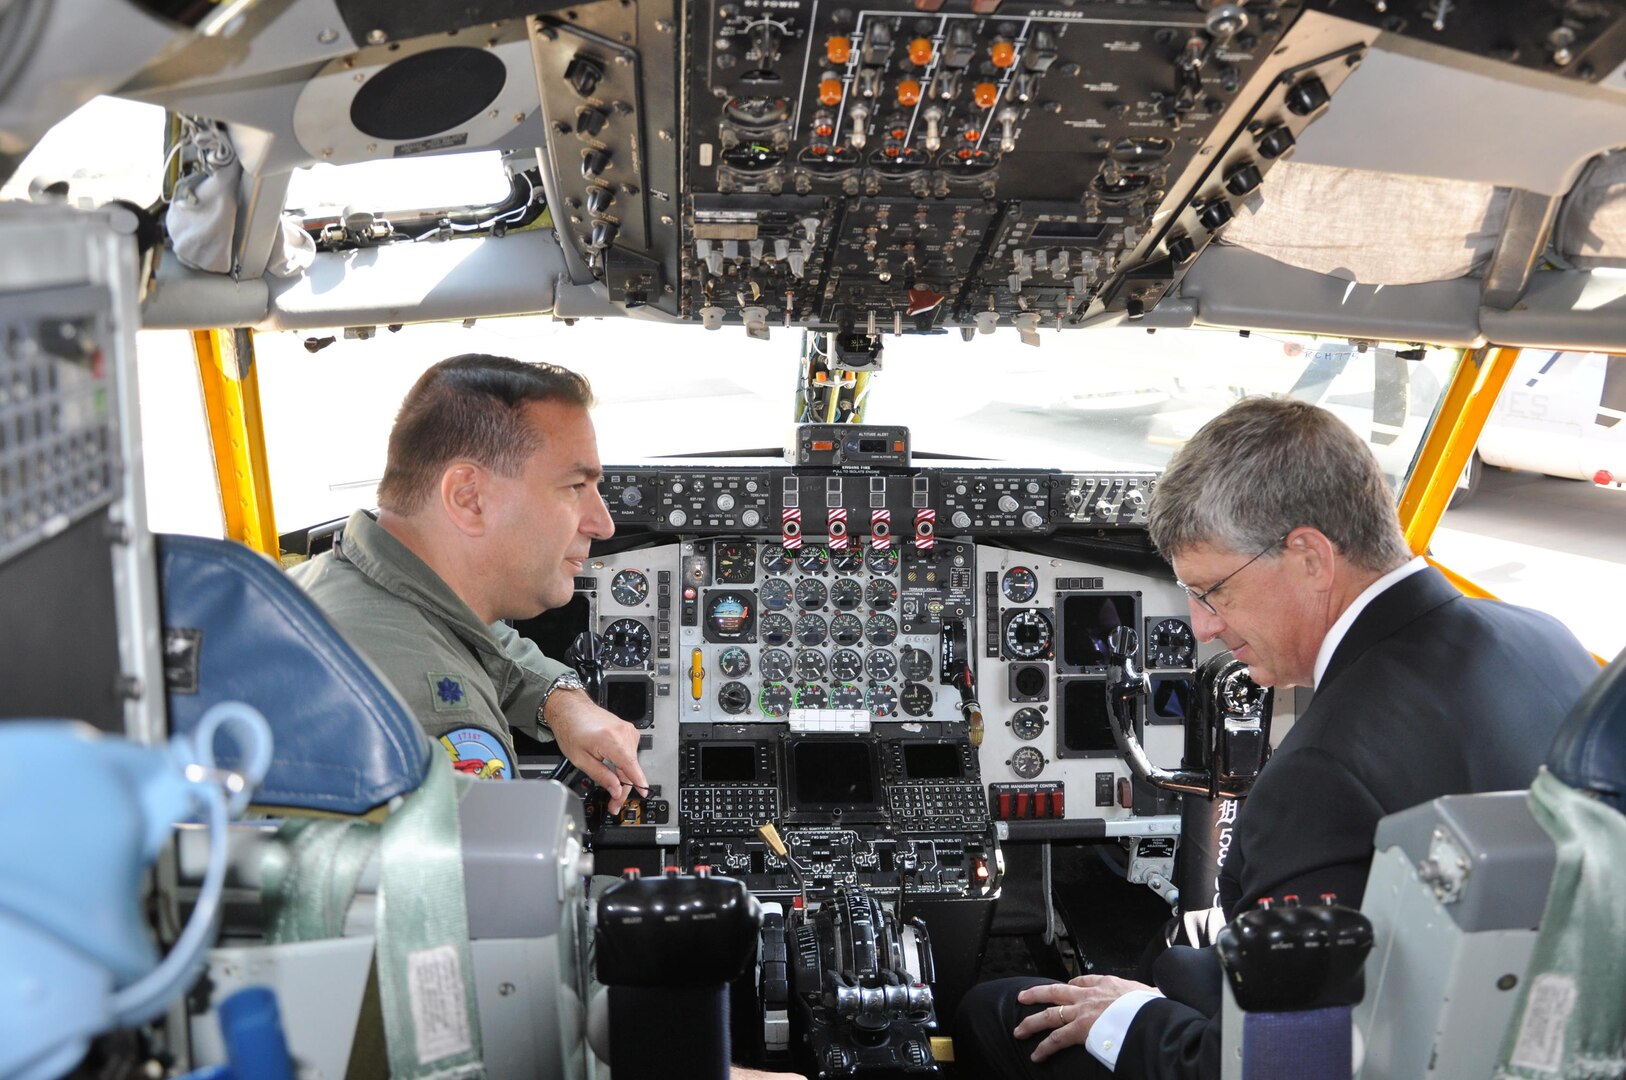 U.S. Ambassador to South Africa Donald H. Gips sits in a KC135T Stratotanker cockpit with Michigan Air National Guard aircraft commander Lt. Col. Paul Beck, Sept. 19, 2012. The two discussed the aircraft’s mission and capabilities during the opening day of the 2012 Africa Aerospace and Defense Airshow and Exhibition.